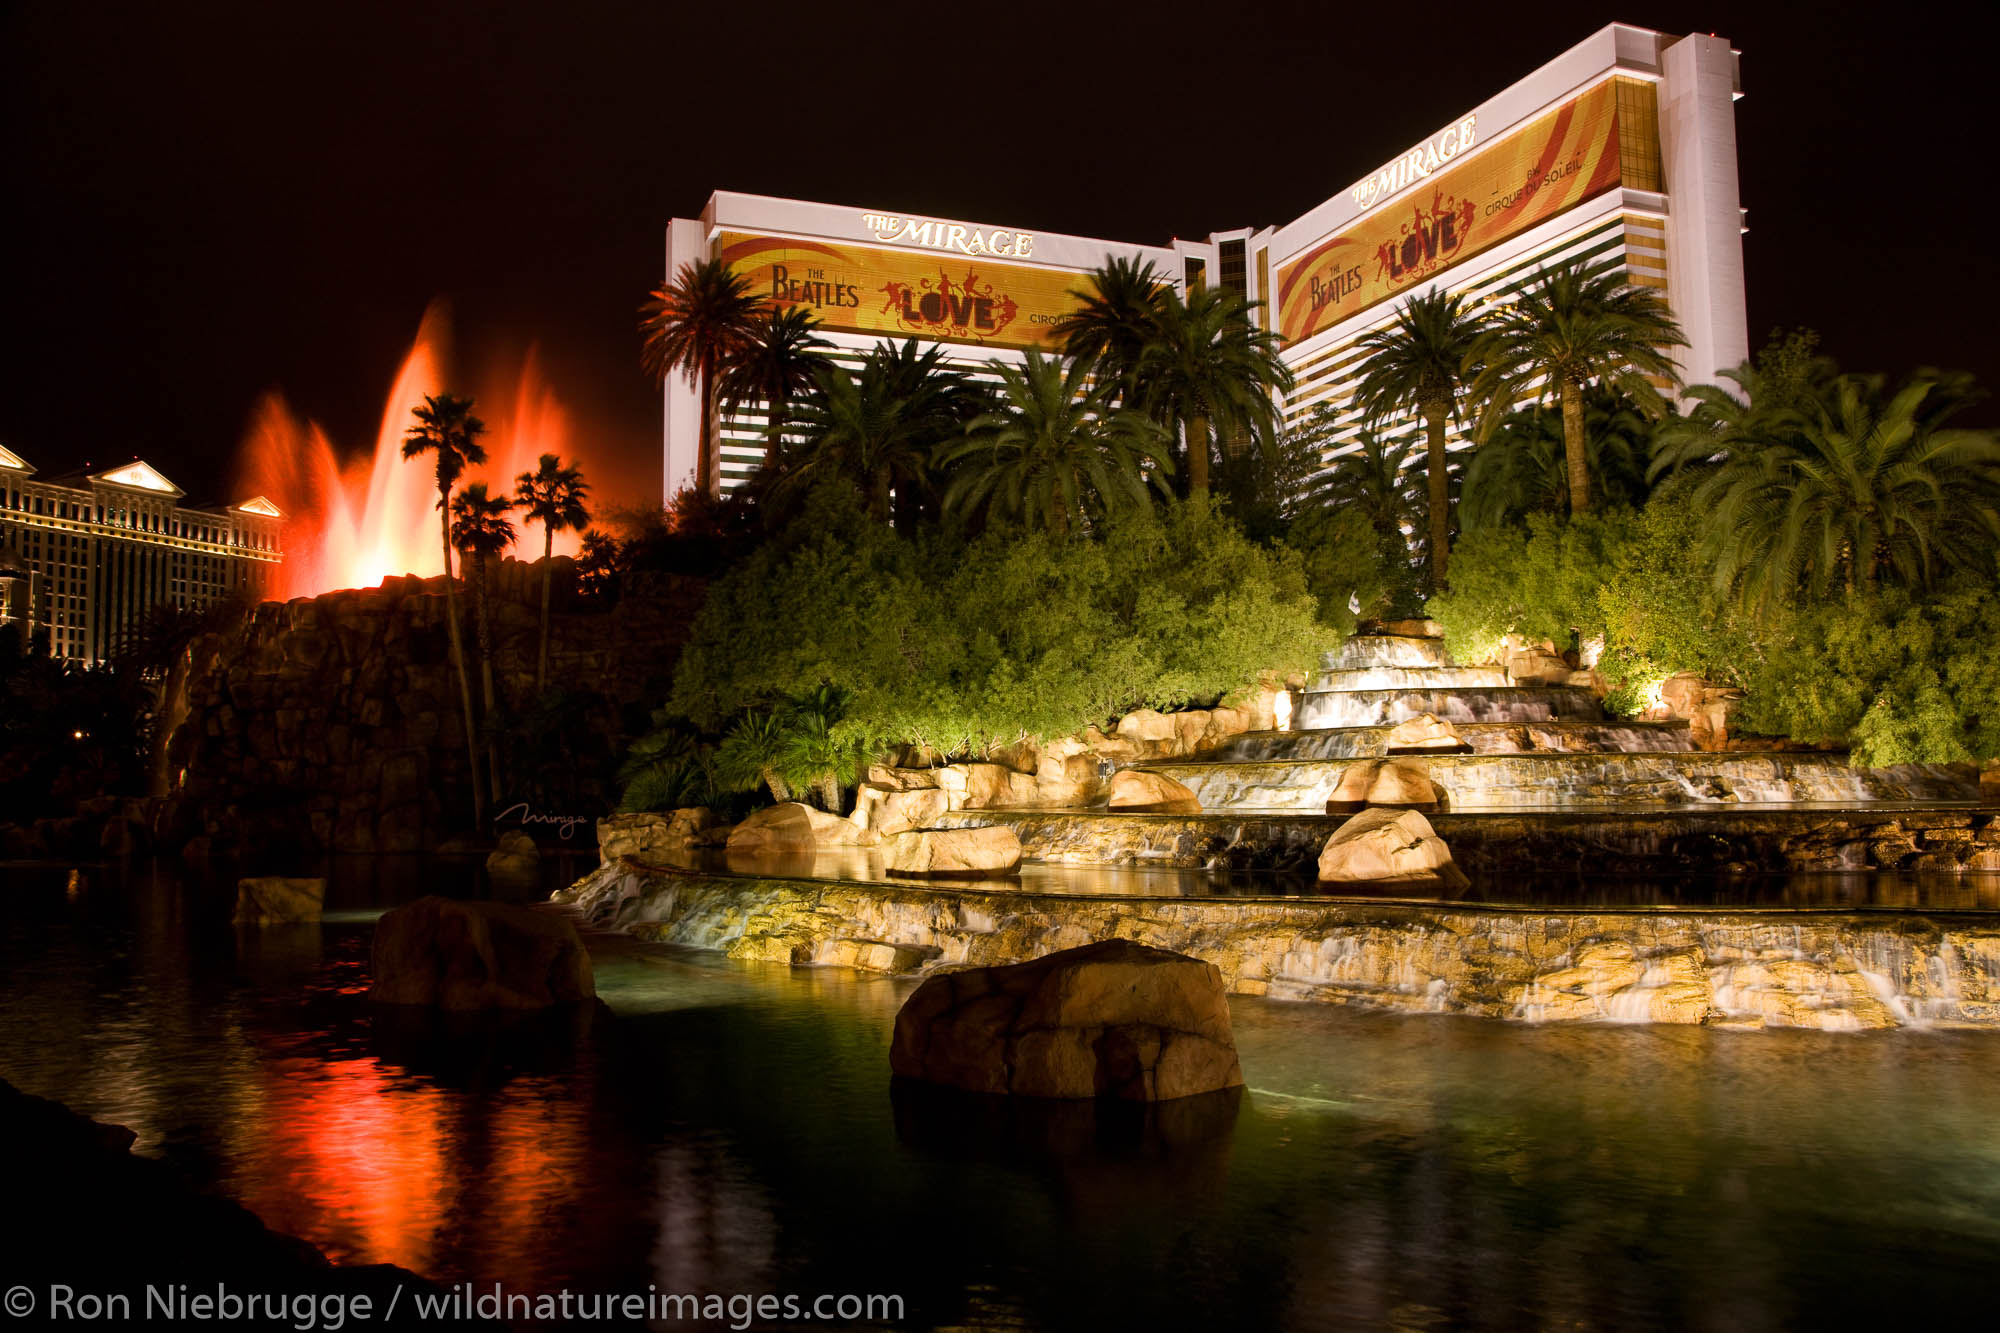 The volcano at the Mirage Hotel and Casino along the Strip at night, Las Vegas, Nevada.